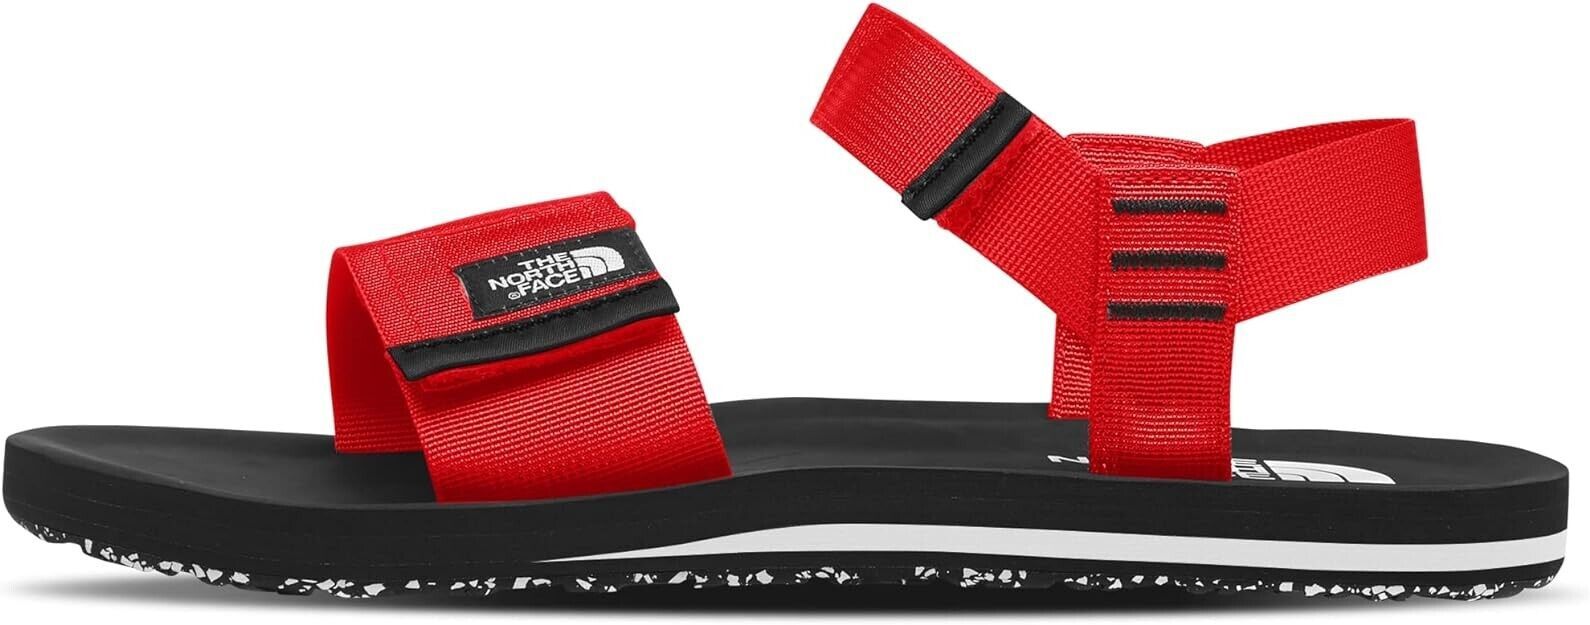 THE NORTH FACE Skeena Sandals Mens 10 Red Black NEW - $44.42